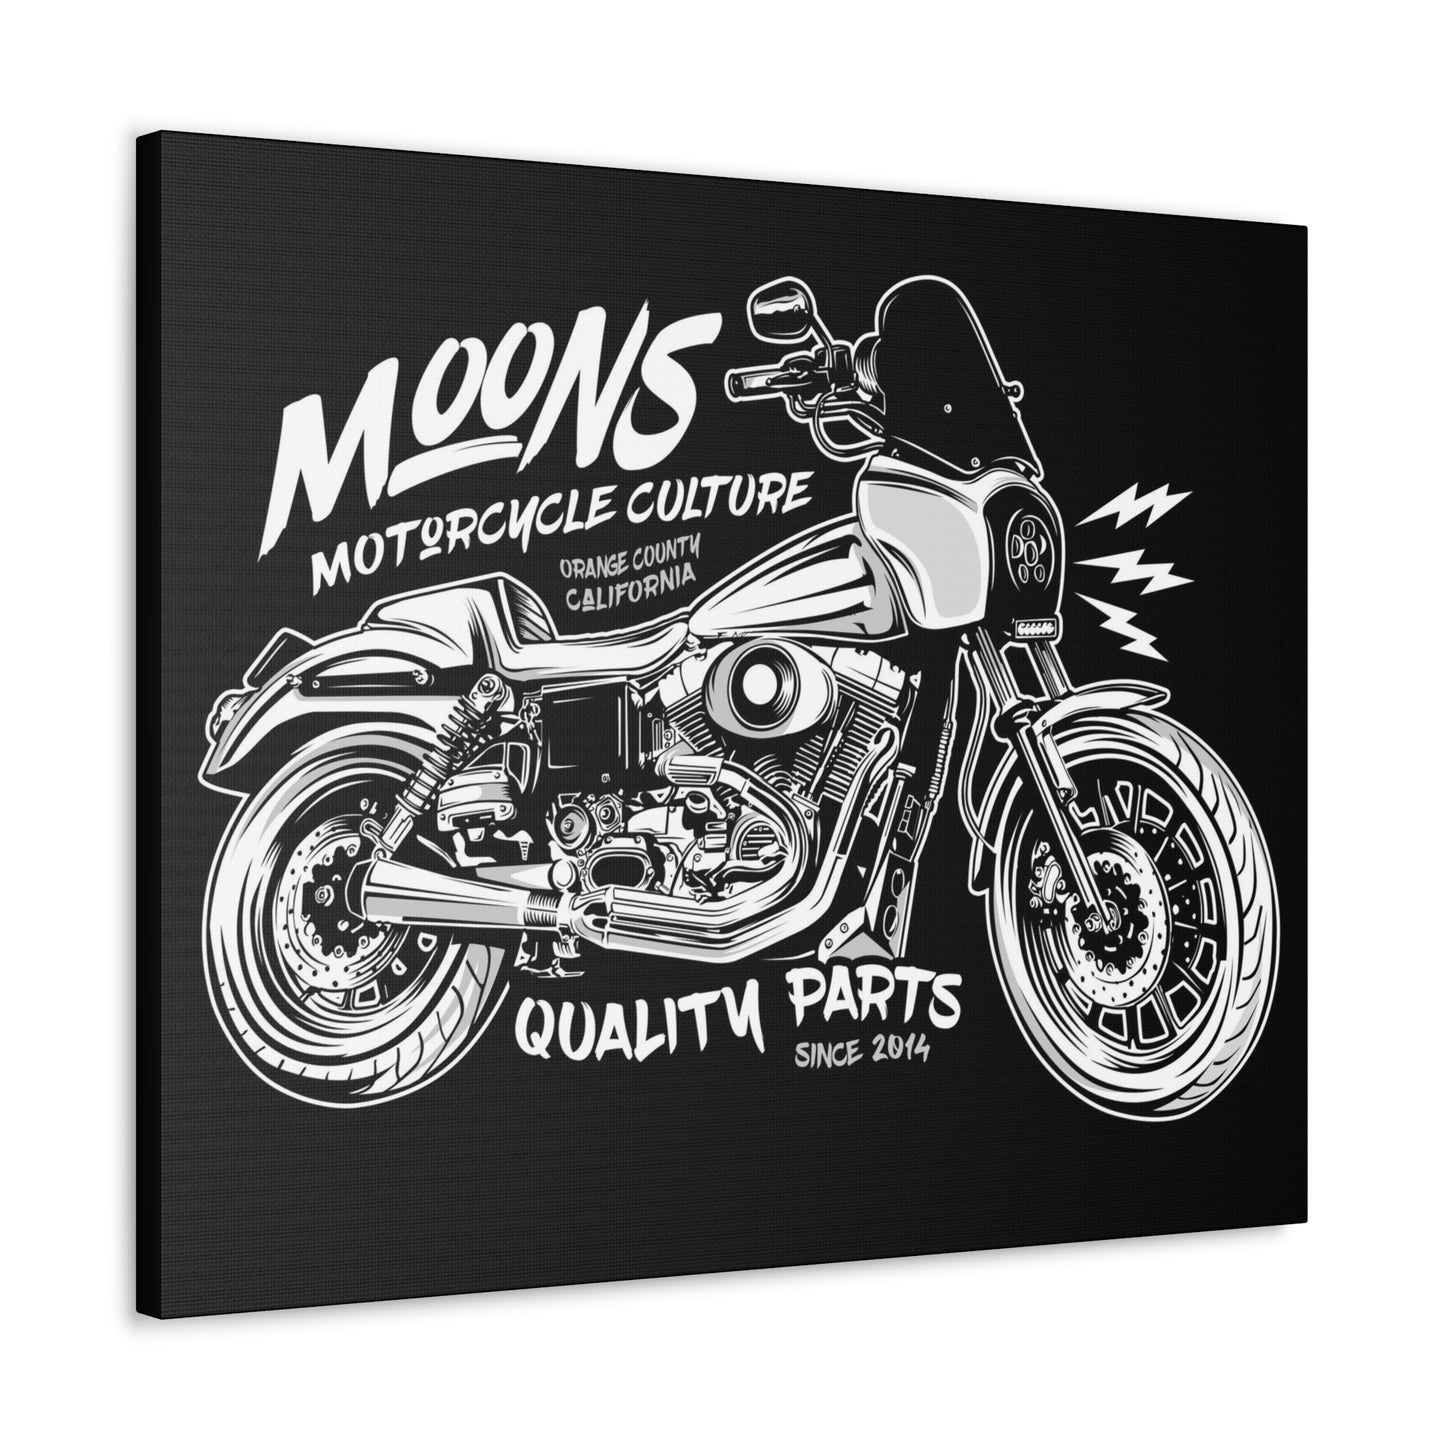 2001 Dyna FXDXT - Canvas Gallery Wrap